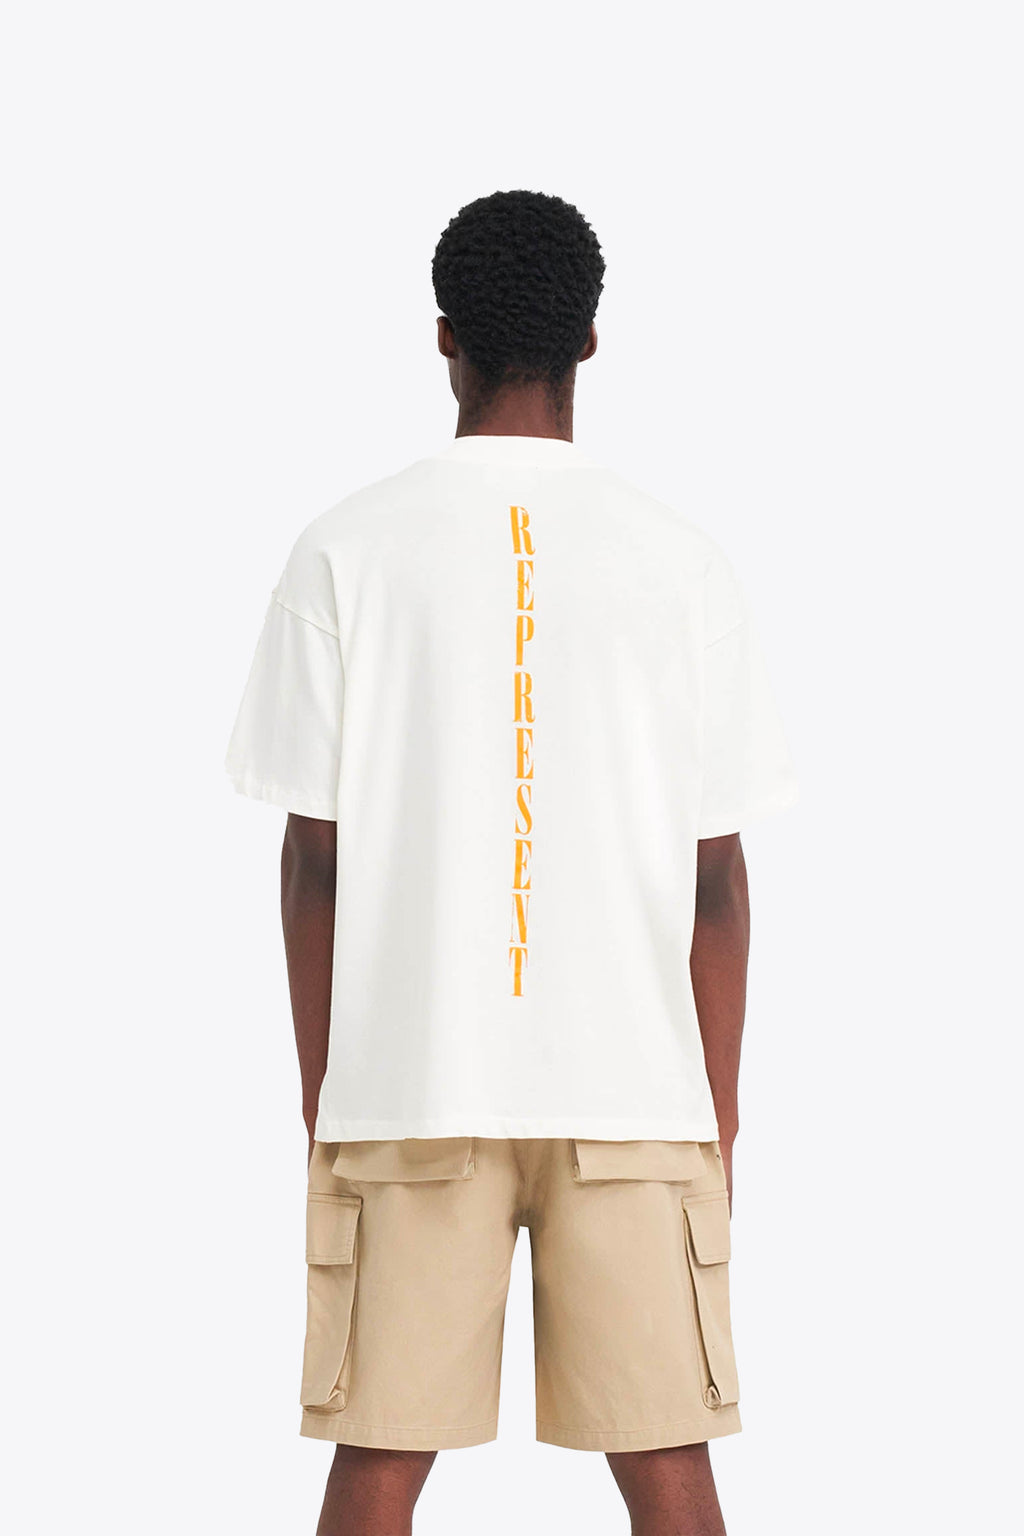 alt-image__Off-white-t-shirt-with-graphic-print-and-logo---Reborn-T-Shirt